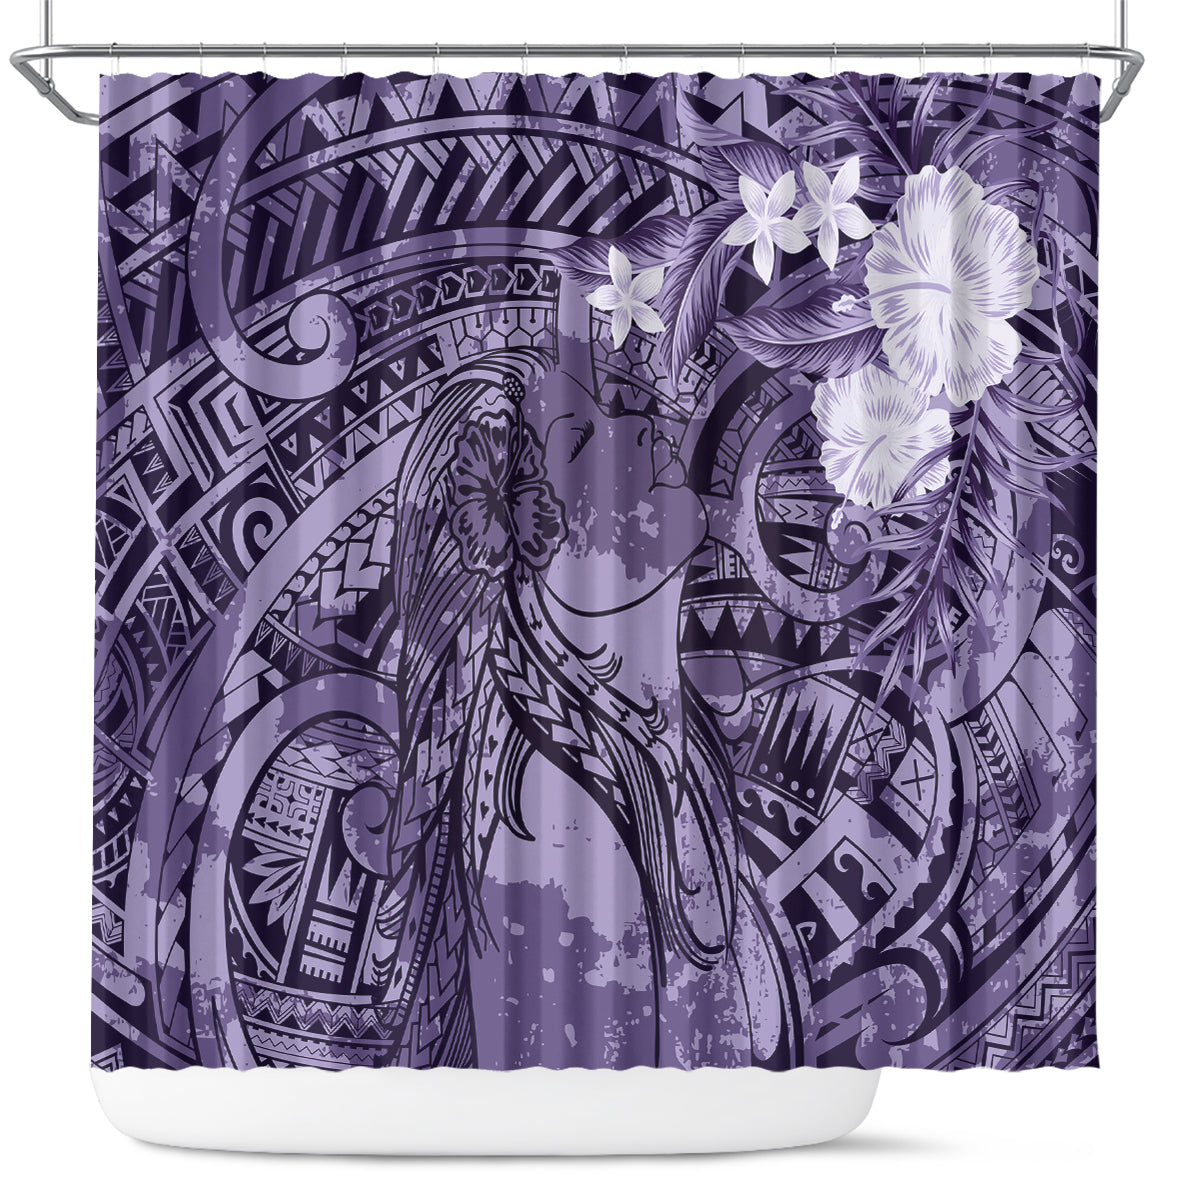 Pacific Beauty Girl Shower Curtain Violet Polyneisan Tribal Vintage Motif